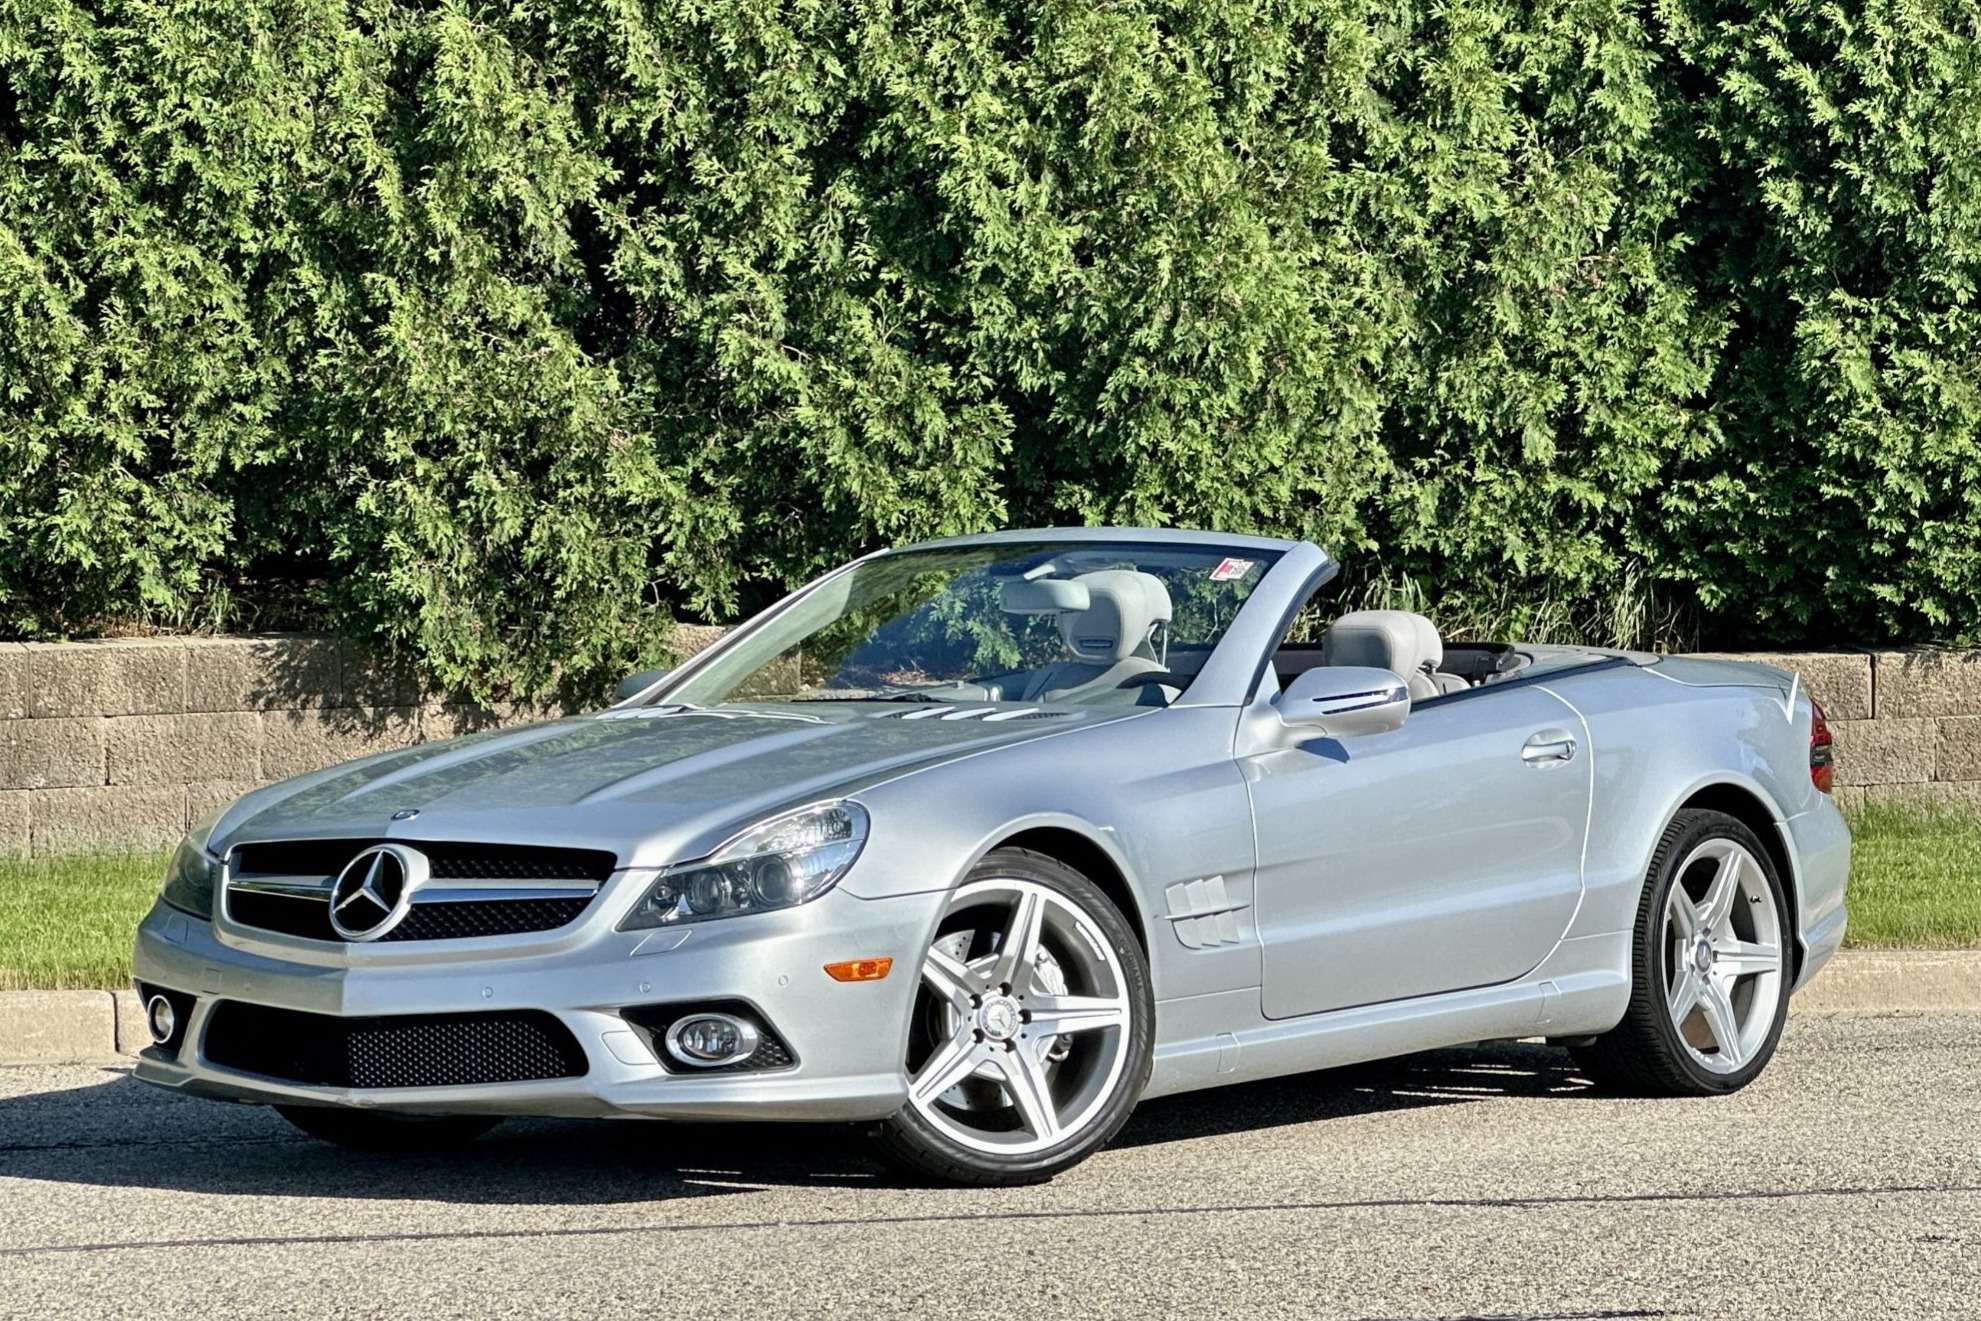 Used 35k-Mile 2011 Mercedes-Benz SL550 Review